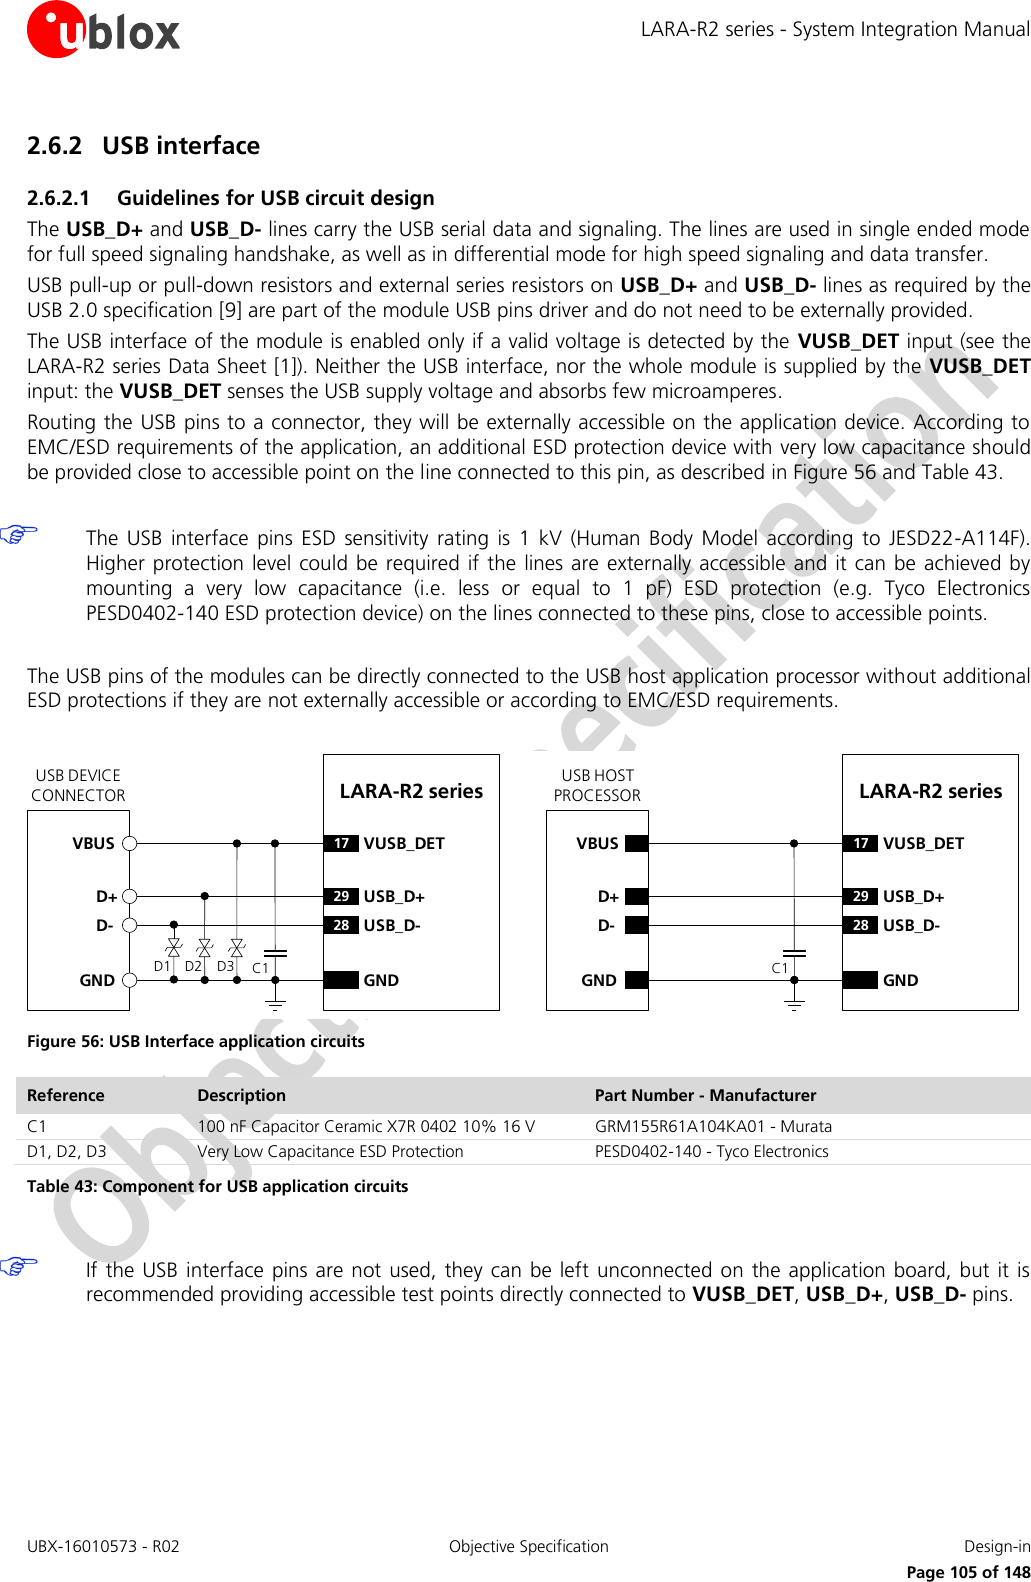 LARA-R2 series - System Integration Manual UBX-16010573 - R02  Objective Specification  Design-in     Page 105 of 148 2.6.2 USB interface 2.6.2.1 Guidelines for USB circuit design The USB_D+ and USB_D- lines carry the USB serial data and signaling. The lines are used in single ended mode for full speed signaling handshake, as well as in differential mode for high speed signaling and data transfer. USB pull-up or pull-down resistors and external series resistors on USB_D+ and USB_D- lines as required by the USB 2.0 specification [9] are part of the module USB pins driver and do not need to be externally provided. The USB interface of the module is enabled only if a valid voltage is detected by the  VUSB_DET input (see the LARA-R2 series Data Sheet [1]). Neither the USB interface, nor the whole module is supplied by the  VUSB_DET input: the VUSB_DET senses the USB supply voltage and absorbs few microamperes. Routing the USB pins to a connector, they will be externally accessible on the application device. According to EMC/ESD requirements of the application, an additional ESD protection device with very low capacitance should be provided close to accessible point on the line connected to this pin, as described in Figure 56 and Table 43.   The  USB  interface  pins ESD  sensitivity  rating  is  1  kV  (Human  Body  Model  according  to  JESD22-A114F). Higher protection level  could be required if the  lines are externally accessible  and  it  can be achieved by mounting  a  very  low  capacitance  (i.e.  less  or  equal  to  1  pF)  ESD  protection  (e.g.  Tyco  Electronics PESD0402-140 ESD protection device) on the lines connected to these pins, close to accessible points.  The USB pins of the modules can be directly connected to the USB host application processor without additional ESD protections if they are not externally accessible or according to EMC/ESD requirements.  LARA-R2 series D+D-GND29 USB_D+28 USB_D-GNDUSB DEVICE CONNECTORD1 D2VBUSLARA-R2 series D+D-GND29 USB_D+28 USB_D-GNDUSB HOST PROCESSORC117 VUSB_DETC117 VUSB_DETVBUSD3 Figure 56: USB Interface application circuits Reference Description Part Number - Manufacturer C1 100 nF Capacitor Ceramic X7R 0402 10% 16 V GRM155R61A104KA01 - Murata D1, D2, D3 Very Low Capacitance ESD Protection PESD0402-140 - Tyco Electronics  Table 43: Component for USB application circuits   If the USB interface pins are  not  used,  they  can be left unconnected on  the application board,  but it is recommended providing accessible test points directly connected to VUSB_DET, USB_D+, USB_D- pins.  